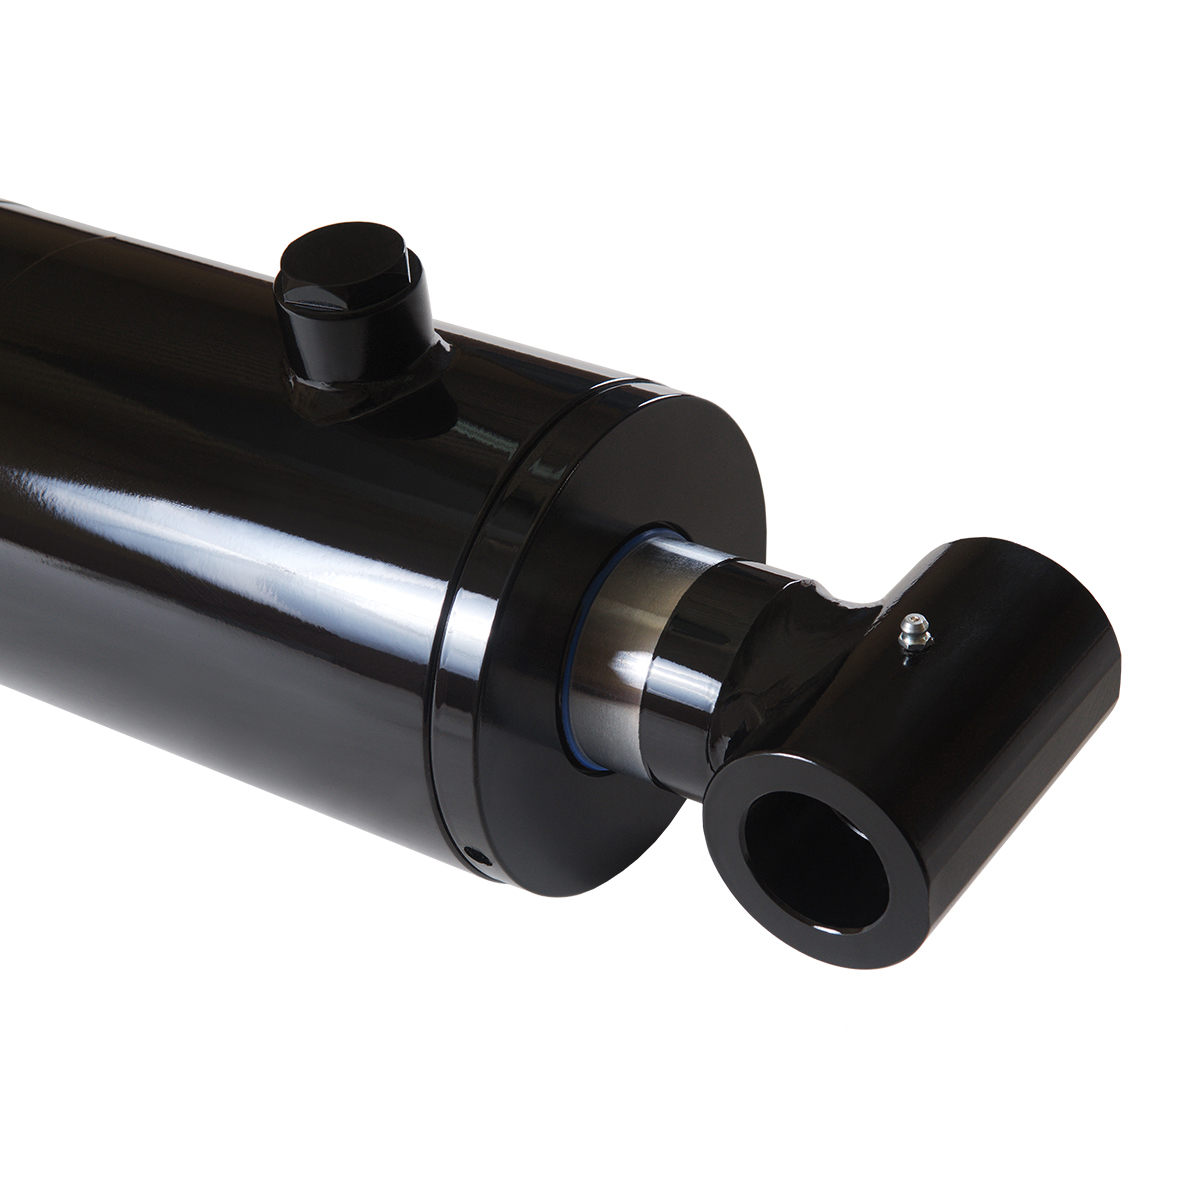 5 bore x 16 stroke hydraulic cylinder, welded cross tube double acting cylinder | Magister Hydraulics